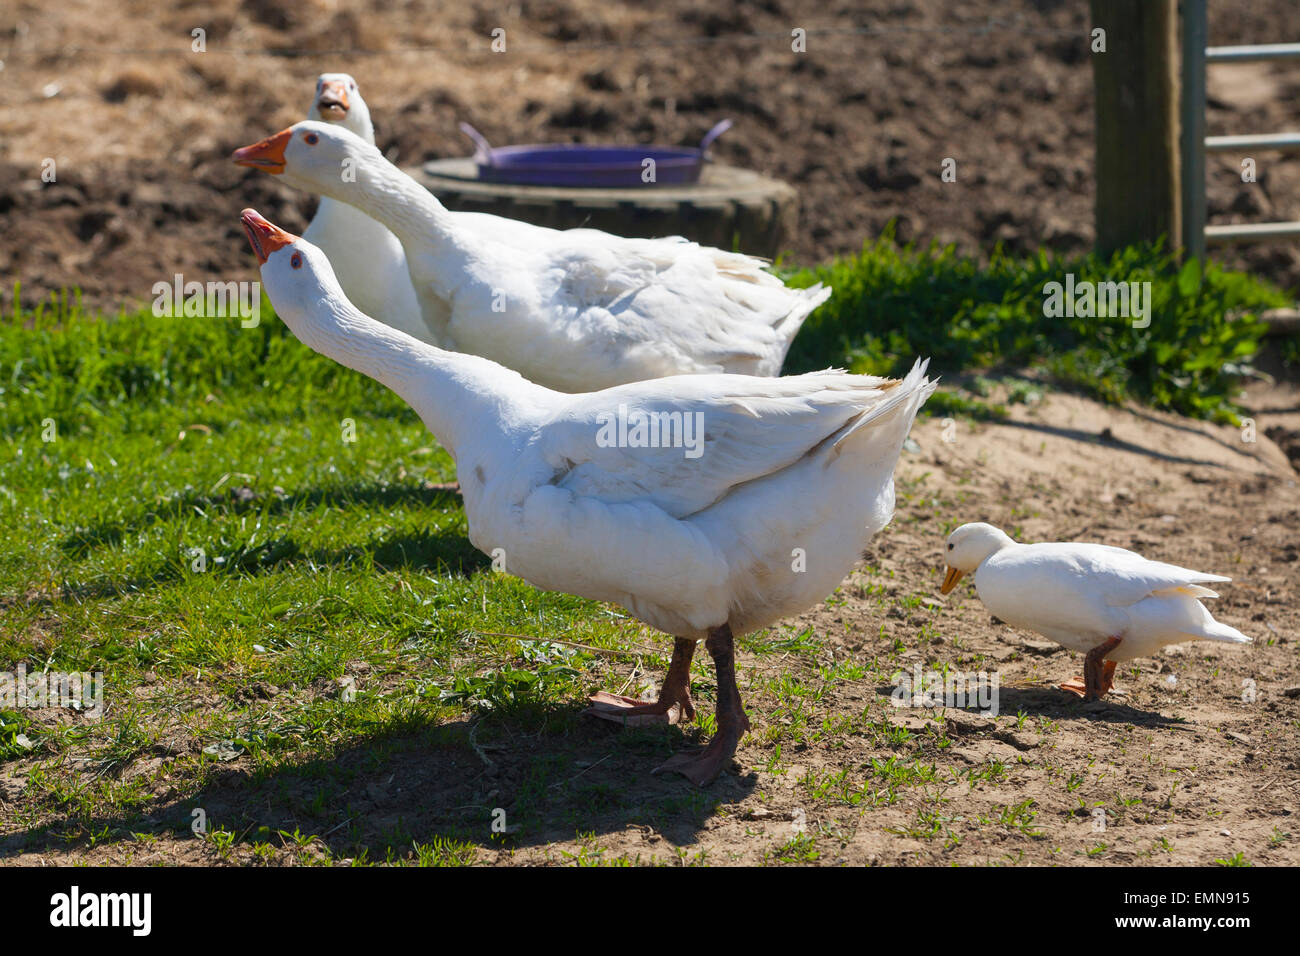 Geese, Goose, agressive, confrontational, angry, dispaly, chase, duck, Isle of Wight Stock Photo